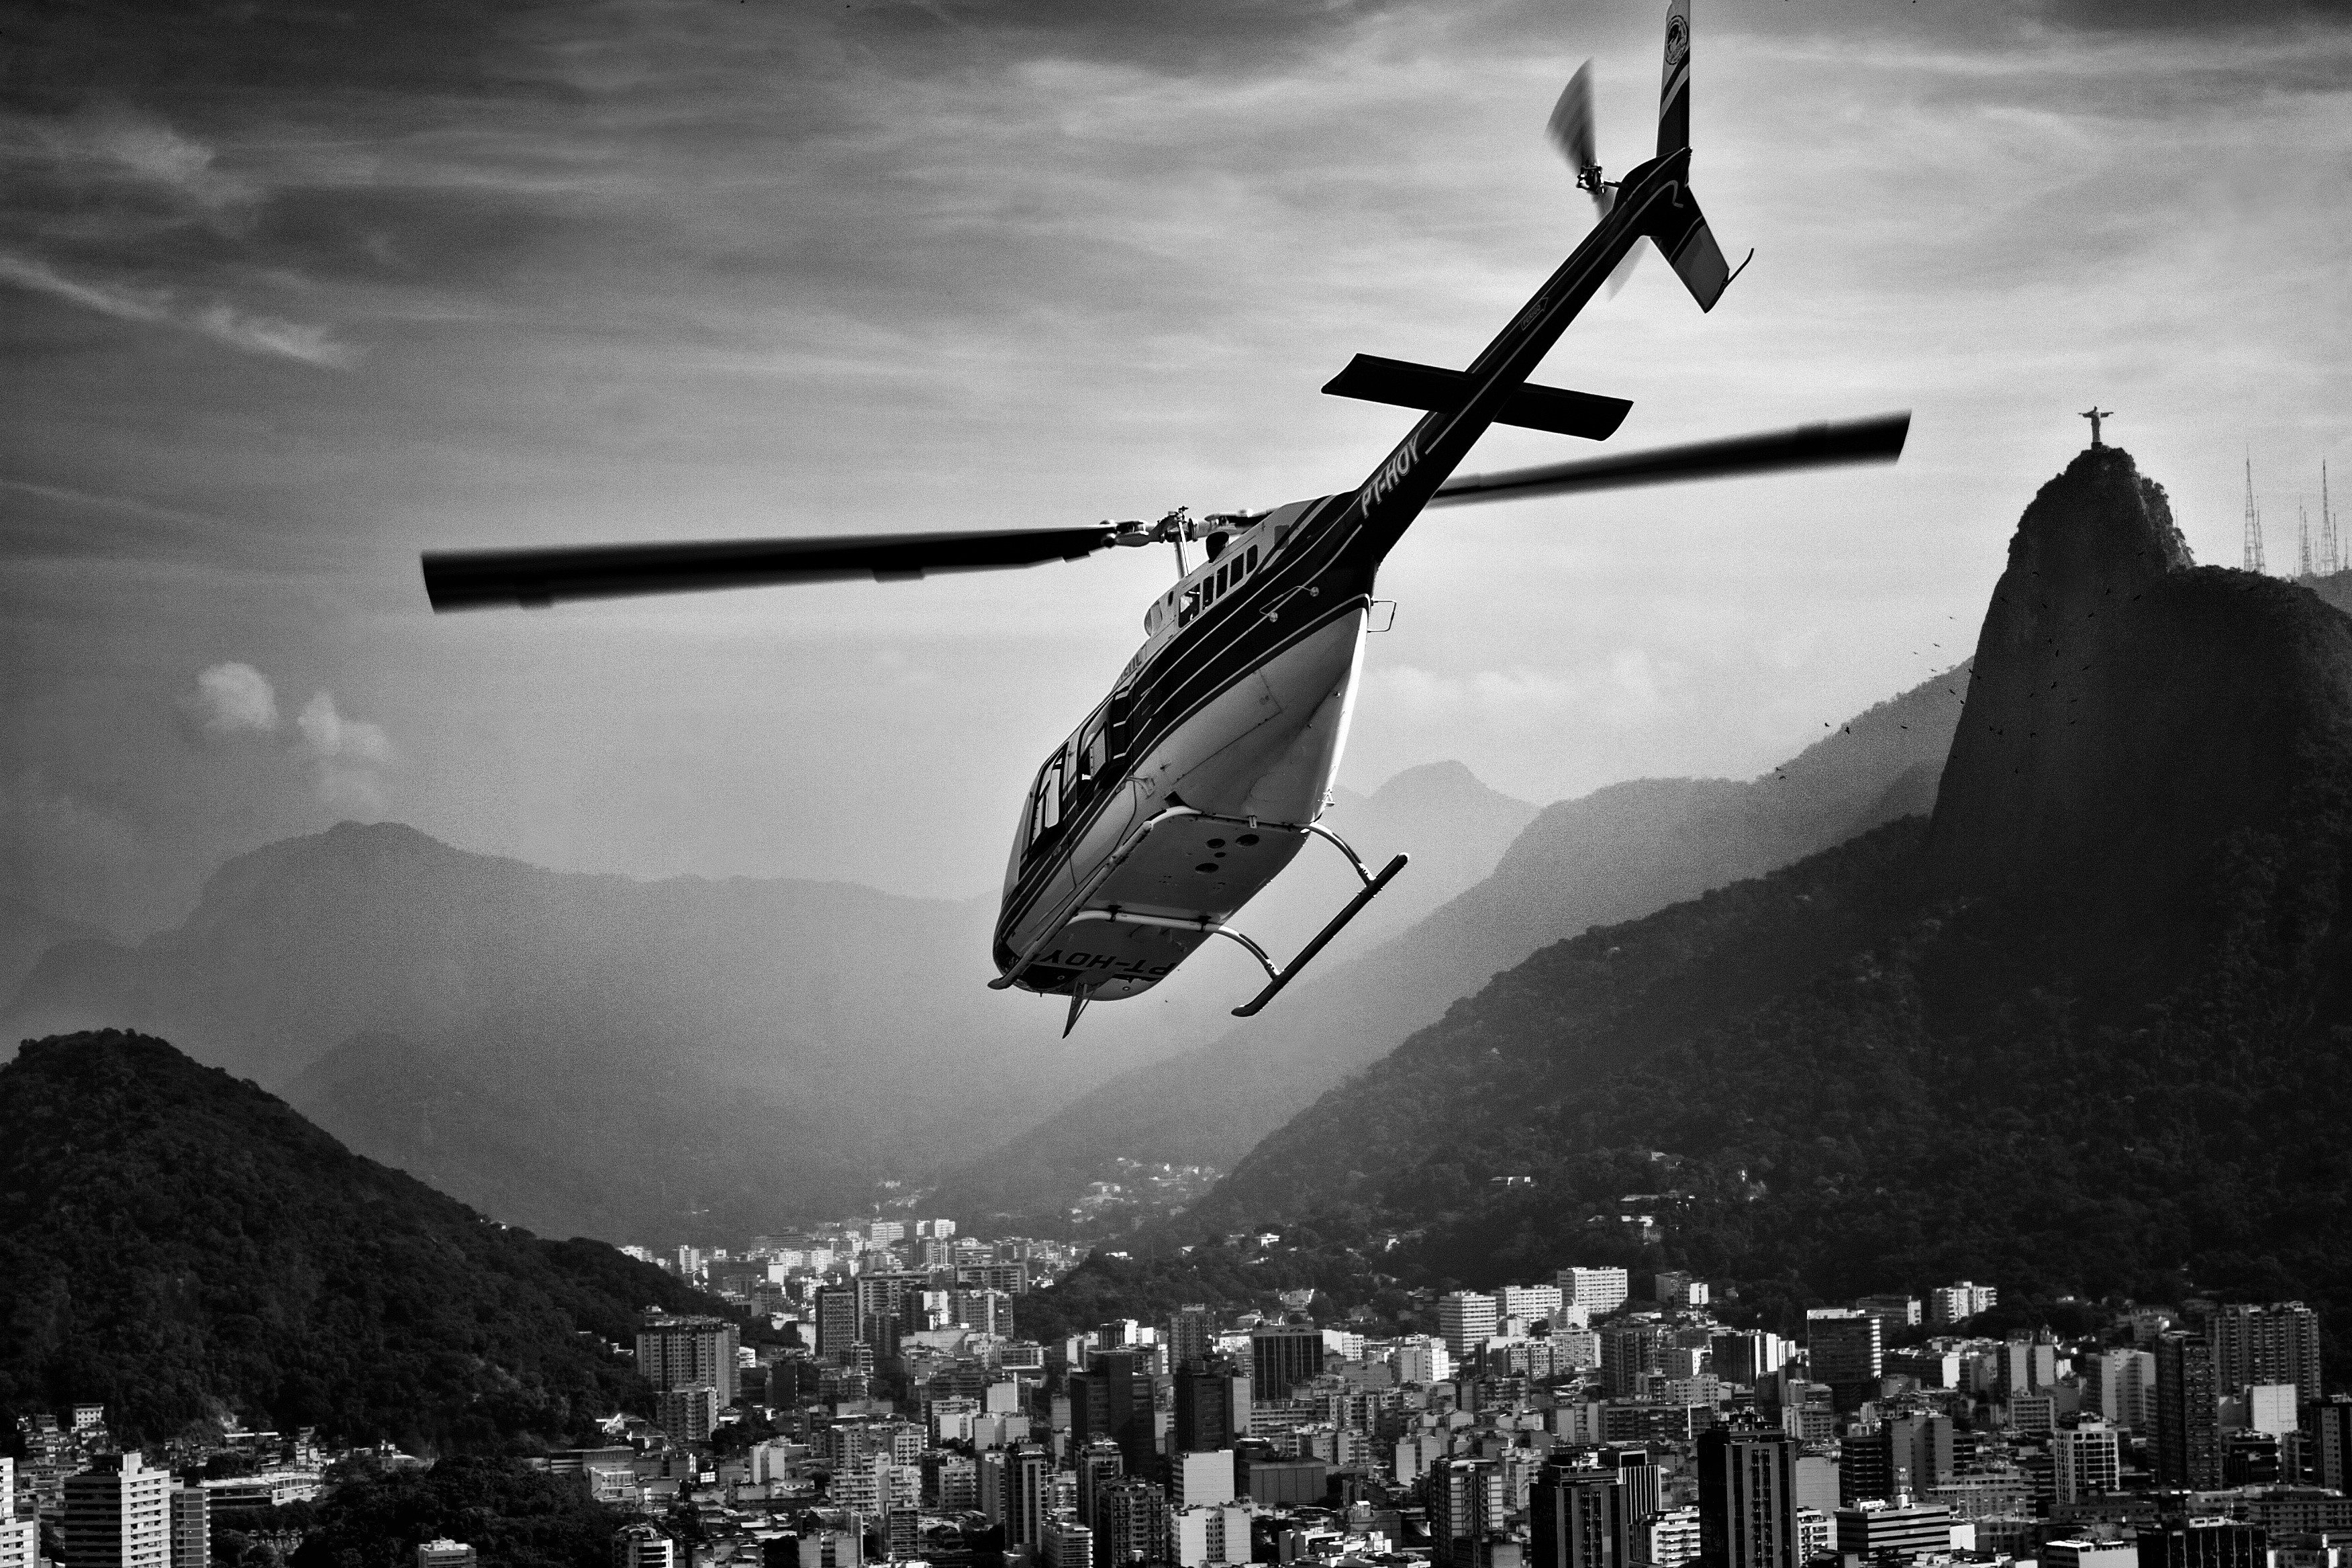 Brazil, City, Monochrome, Helicopters Wallpaper